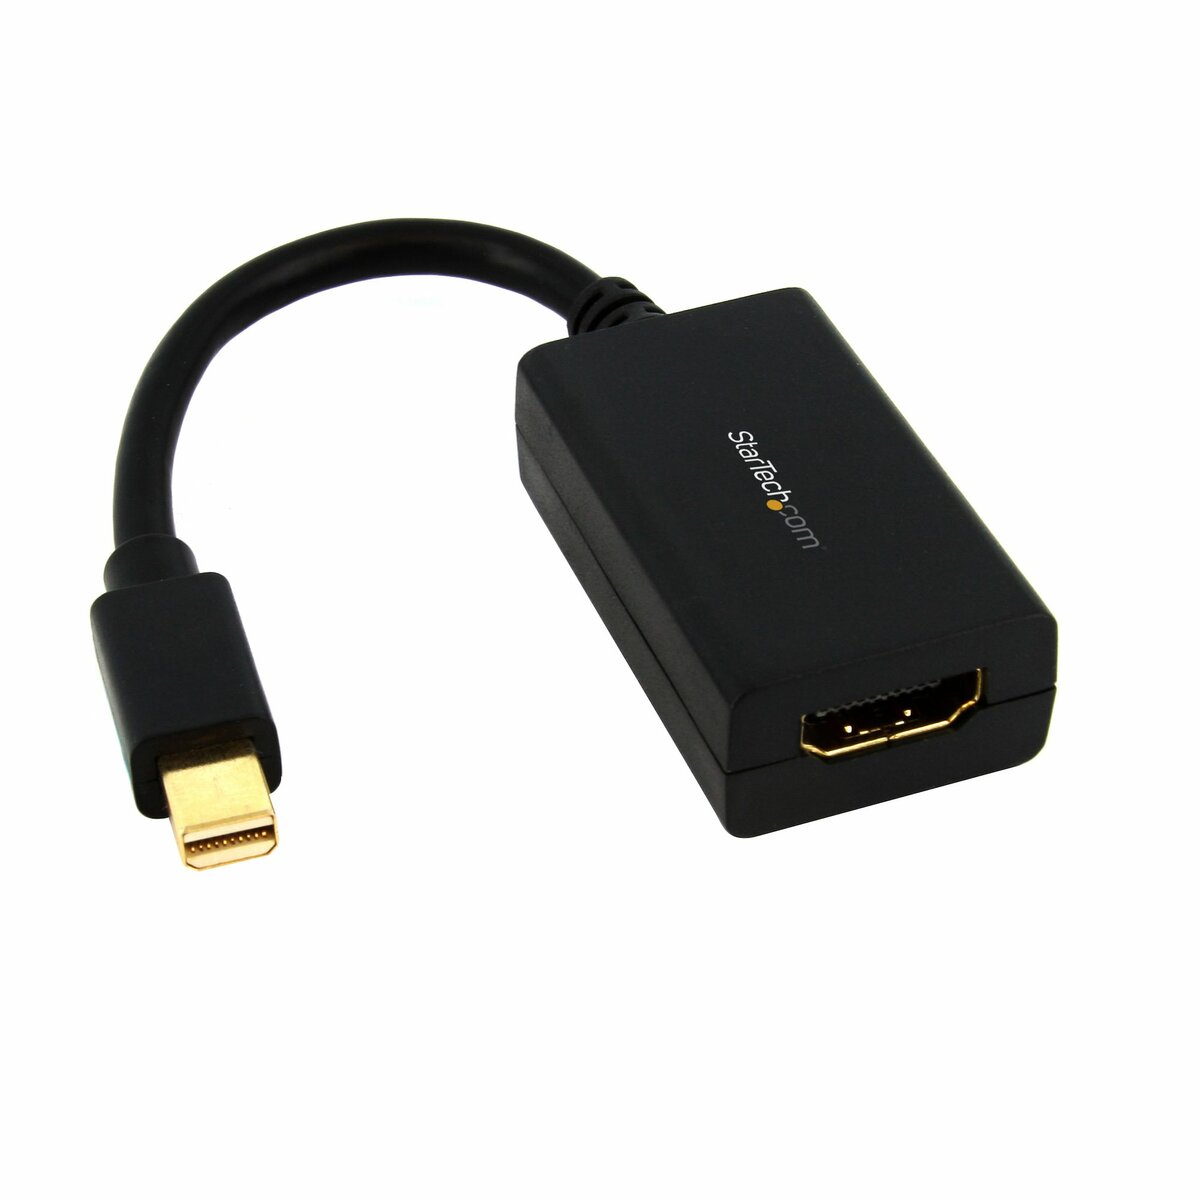 StarTech.com Mini DisplayPort to HDMI Adapter, Mini DisplayPort to HDMI Converter, 1080p Video, Mini DP or Thunderbolt 1/2 Mac/PC to HDMI Monitor/Display/TV, mDP HDMI Dongle, Passive - mDP 1.2 to HDMI